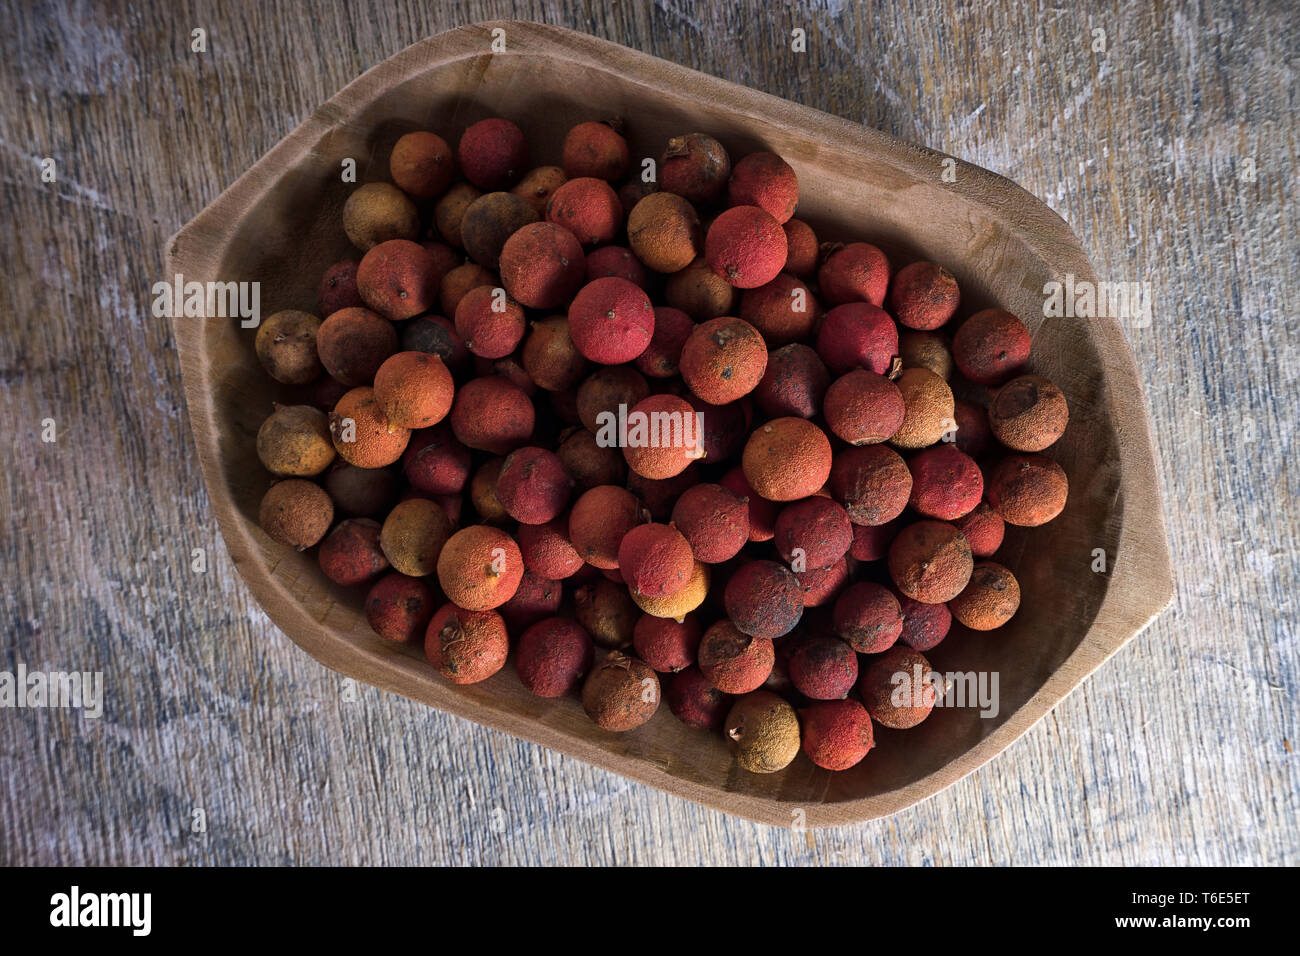 corozo palm tree nuts in Colombia Stock Photo